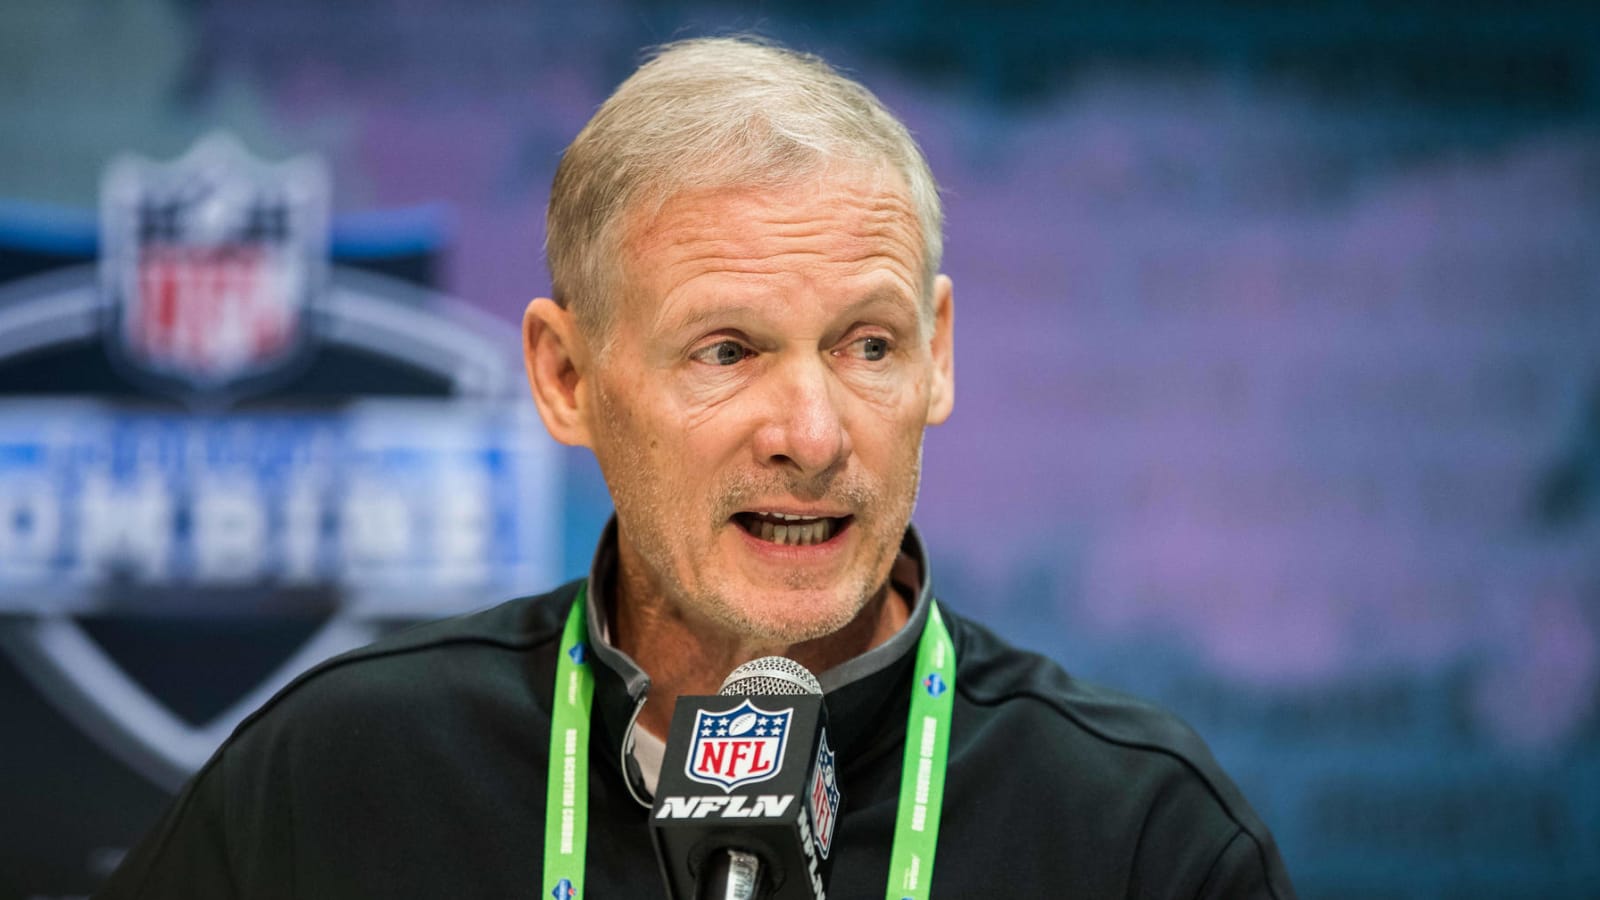 Raiders GM Mike Mayock to donate 1,000 for every draft pick he makes to COVID-19 relief